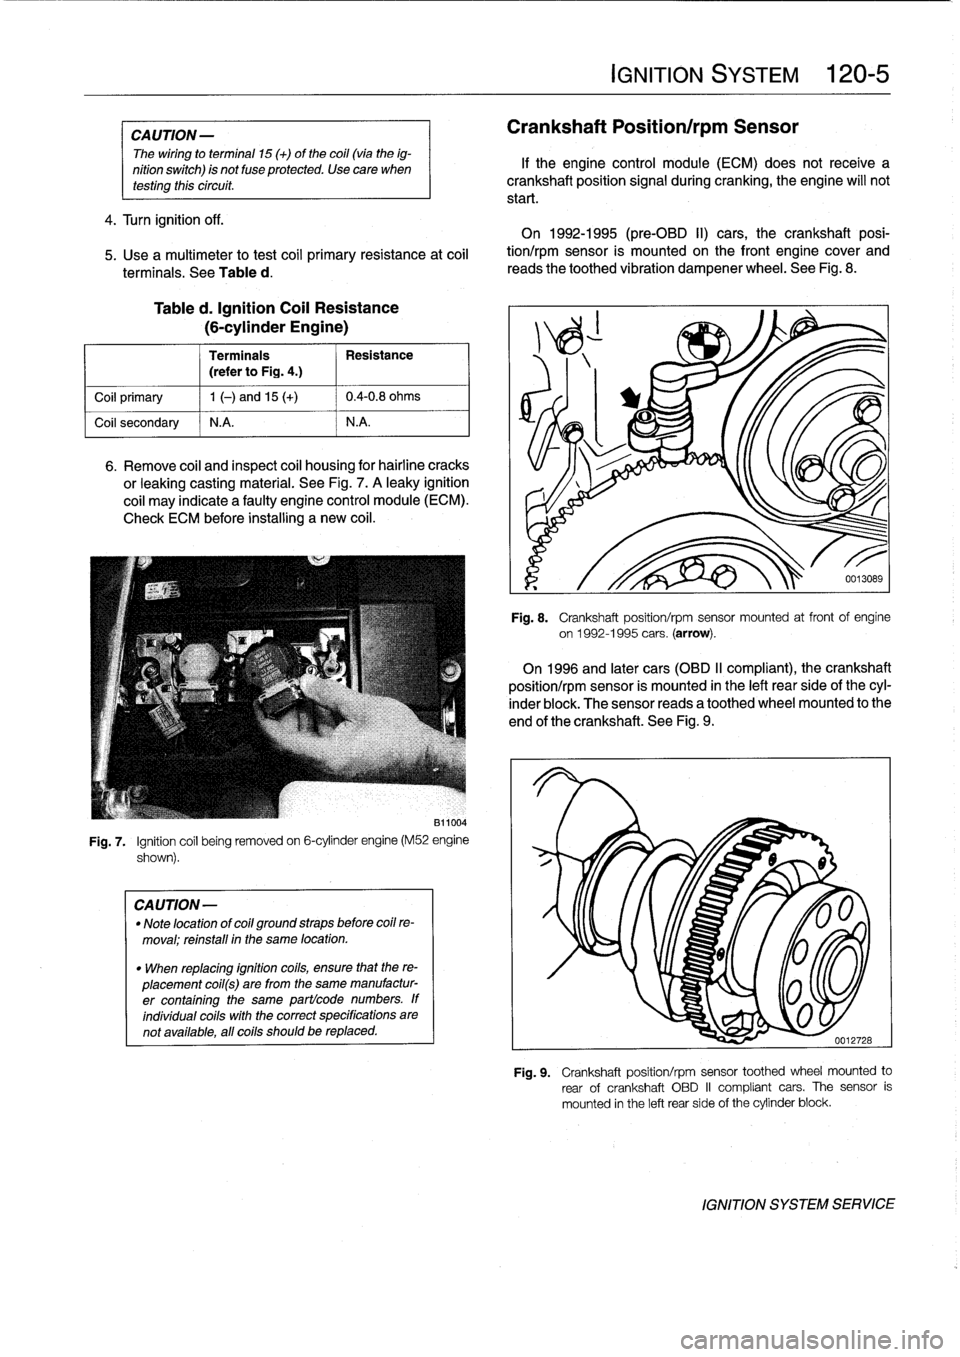 BMW 325i 1992 E36 Workshop Manual 
CAUTION
-

The
wiring
to
termina¡
15
(+)
of
the
coil(vía
the
ig-

nition
switch)
is
not
fuse
protected
.
Use
care
when
testíng
thiscircuit
.

4
.
Turn
ignition
off
.

5
.
Use
a
multimeter
to
test
